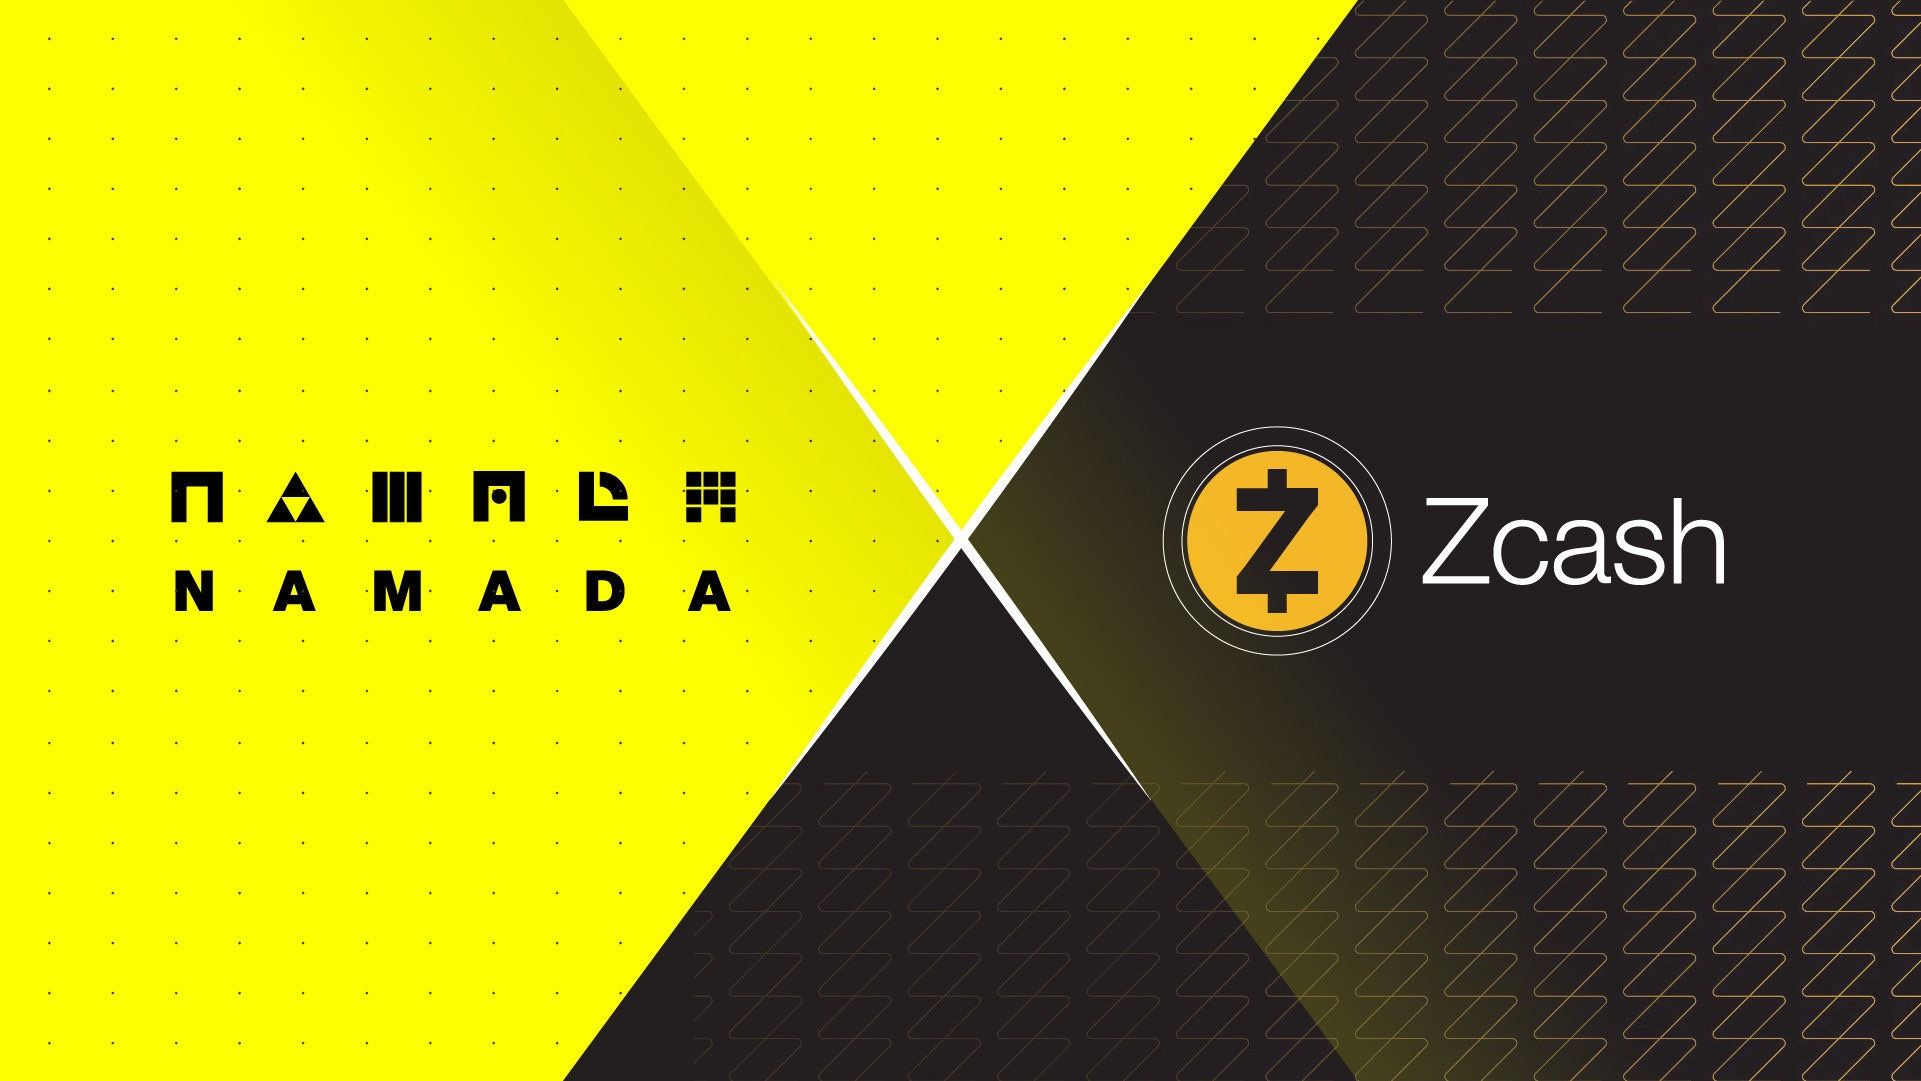 RFC: Proposal for a strategic alliance between Namada and Zcash